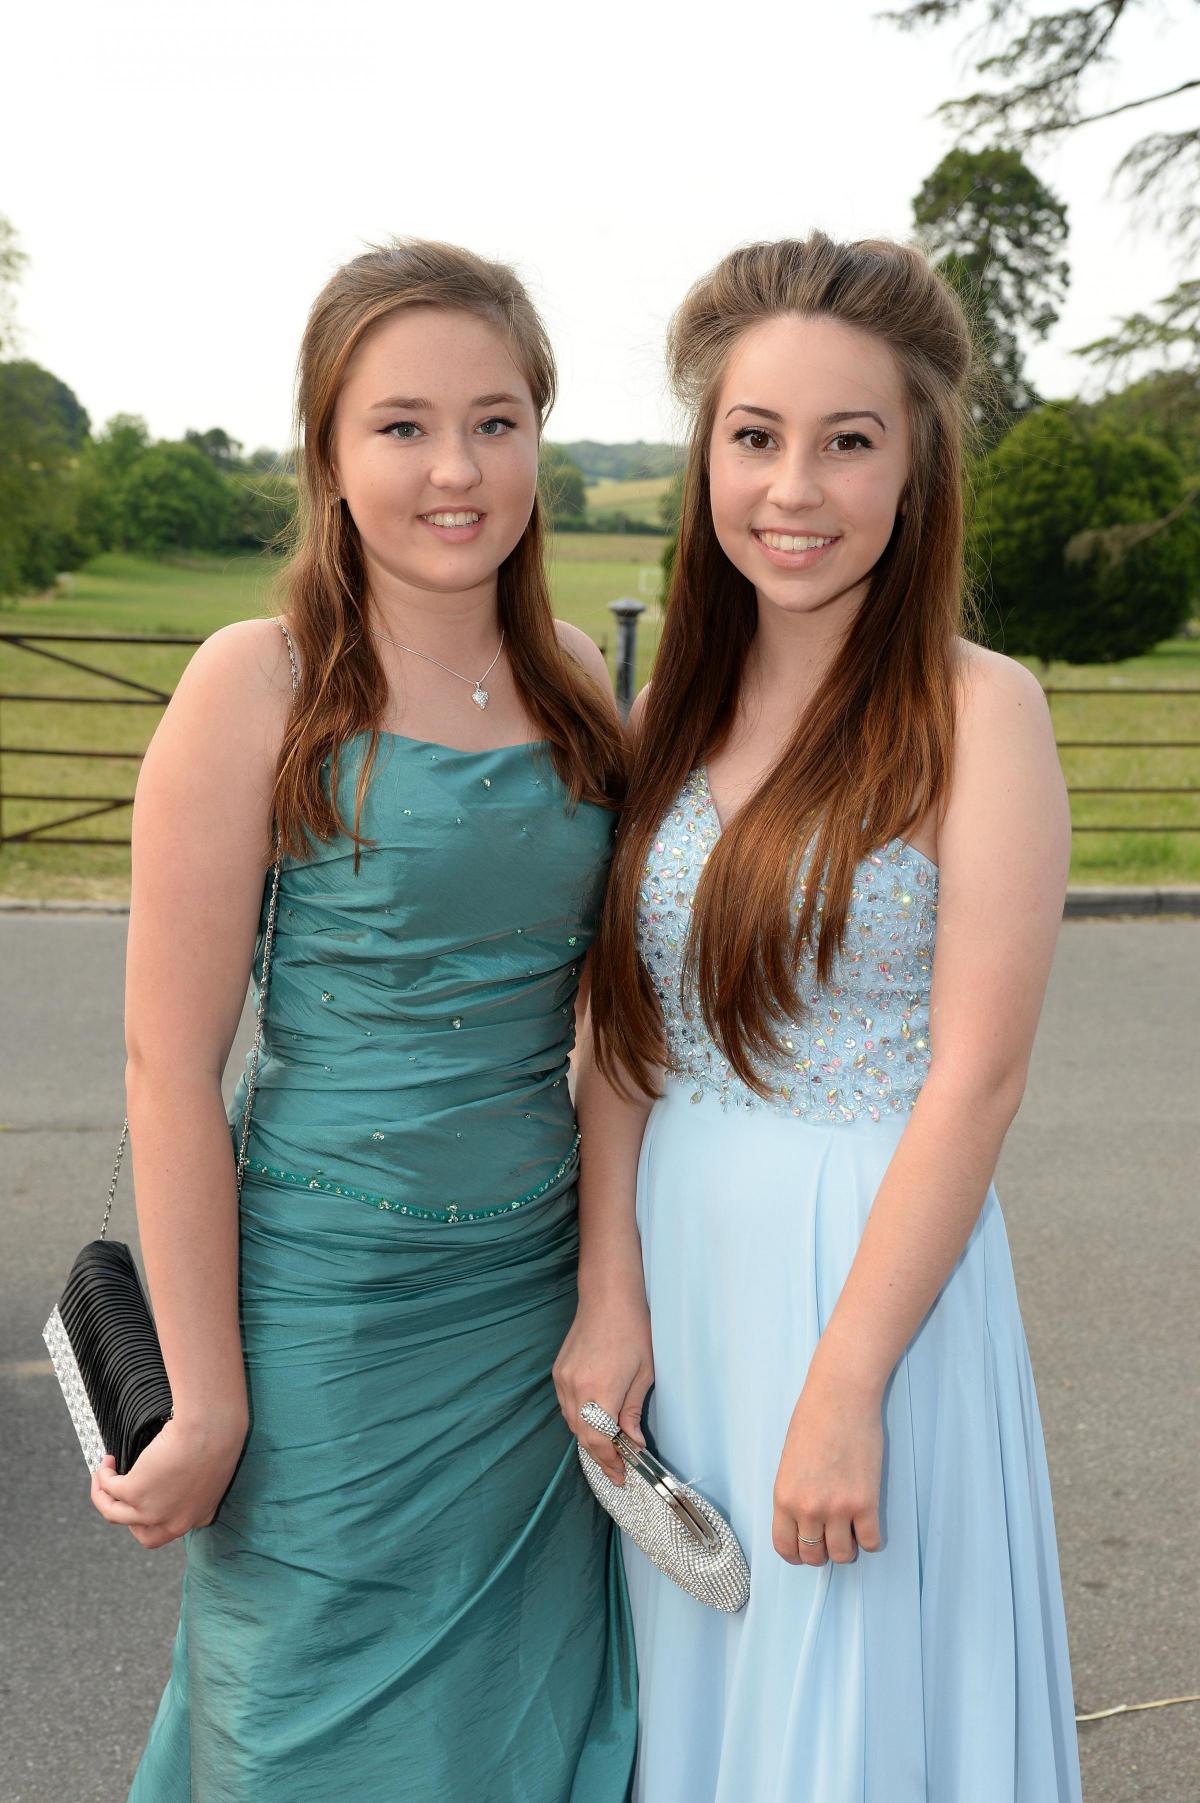 All our photos from the Thomas Hardye School Year 11 Prom